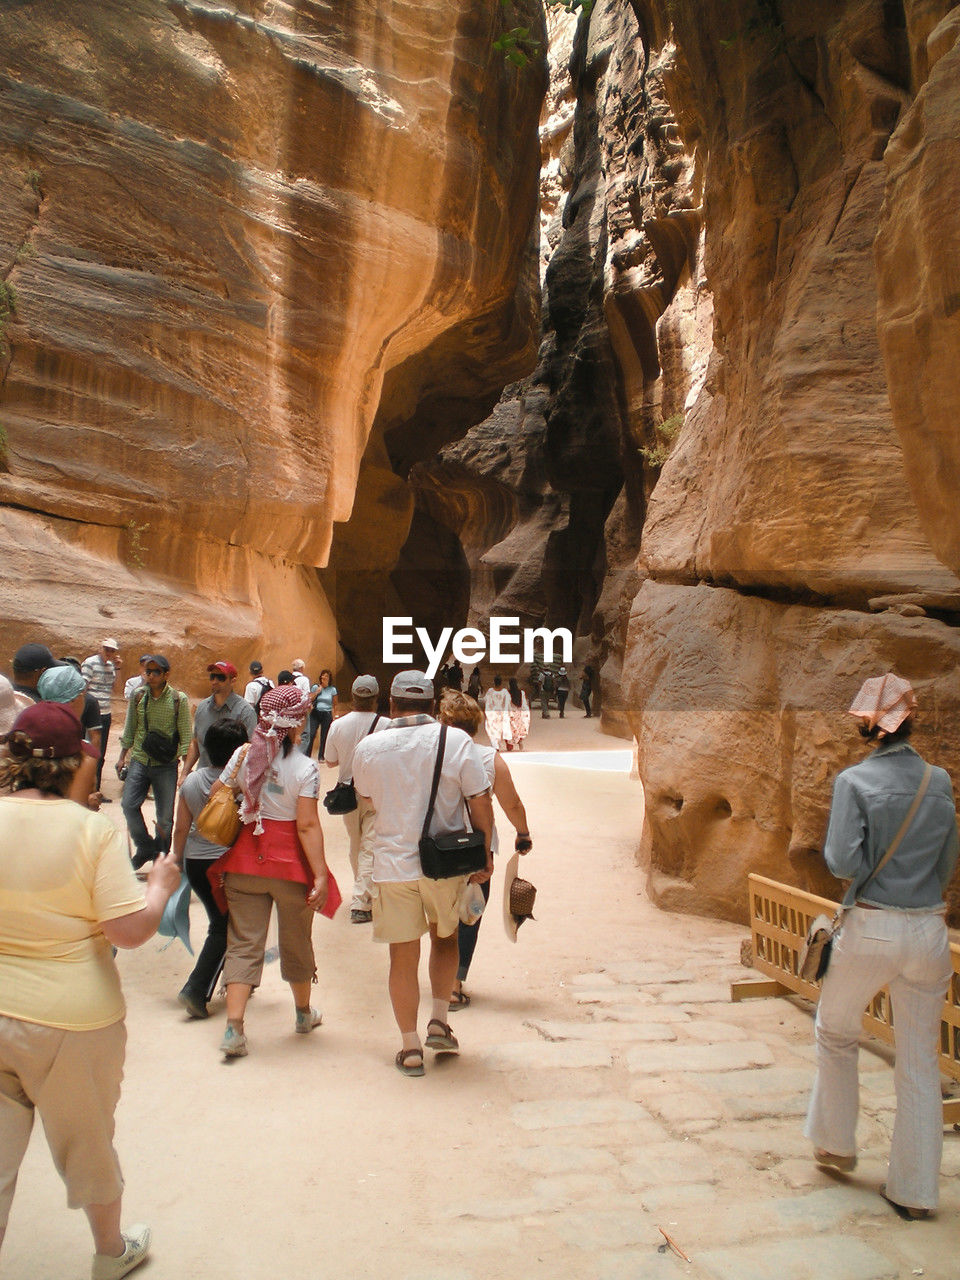 group of people, rock, rock formation, travel, adult, travel destinations, full length, men, women, tourism, walking, nature, leisure activity, wadi, architecture, tourist, formation, activity, canyon, trip, holiday, cave, vacation, history, adventure, arch, outdoors, footwear, land, lifestyles, temple, medium group of people, geology, day, ancient history, physical geography, the past, rear view, exploration